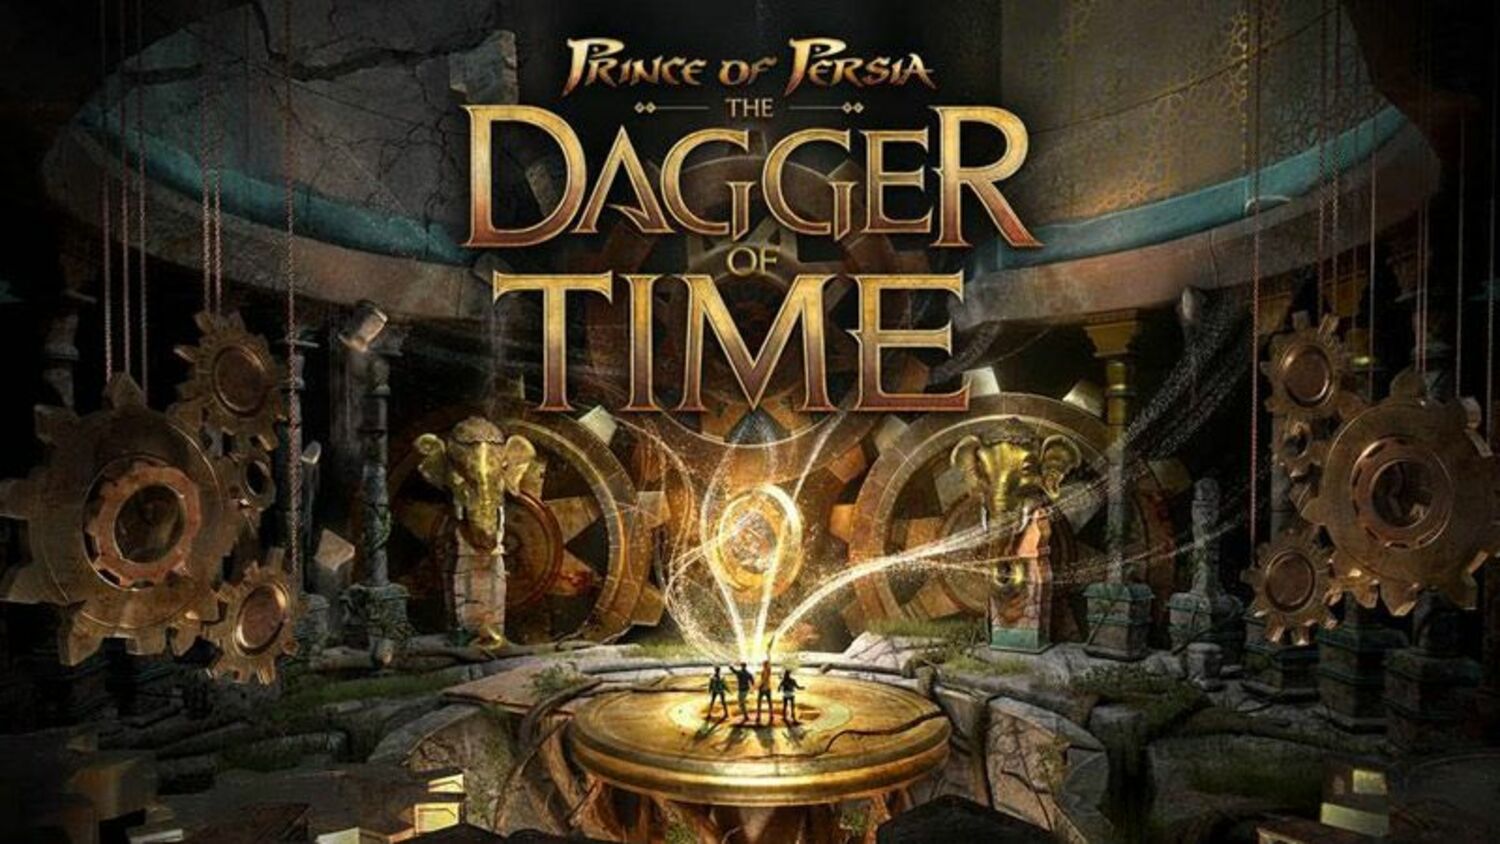 The Dagger of Time